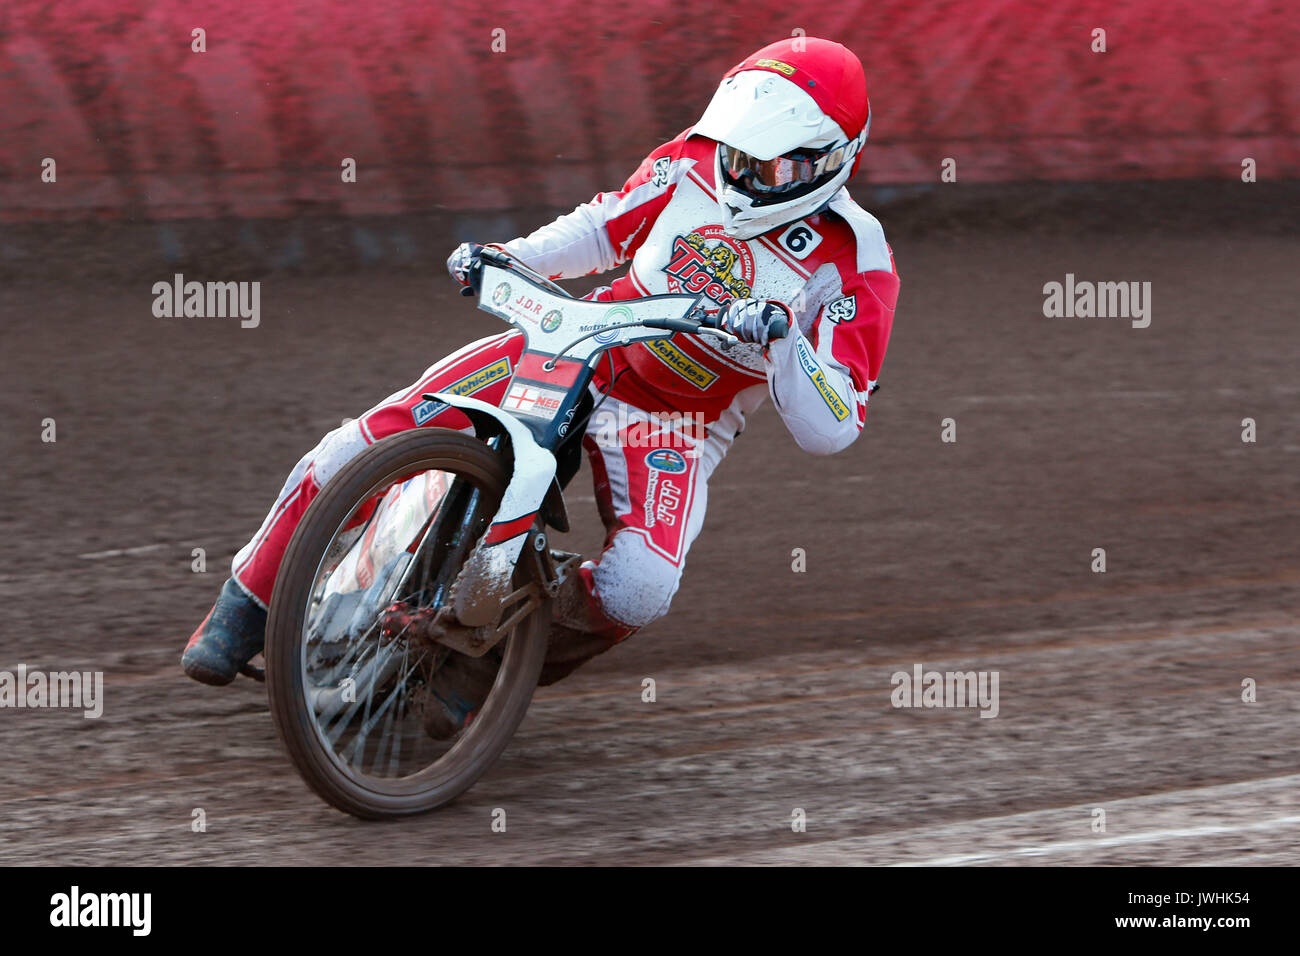 Glasgow, Scotland, UK. 12th August, 2017. Tom Perry leads into the 1st corner in Heat 2 Credit: Colin Poultney/Alamy Live News Stock Photo